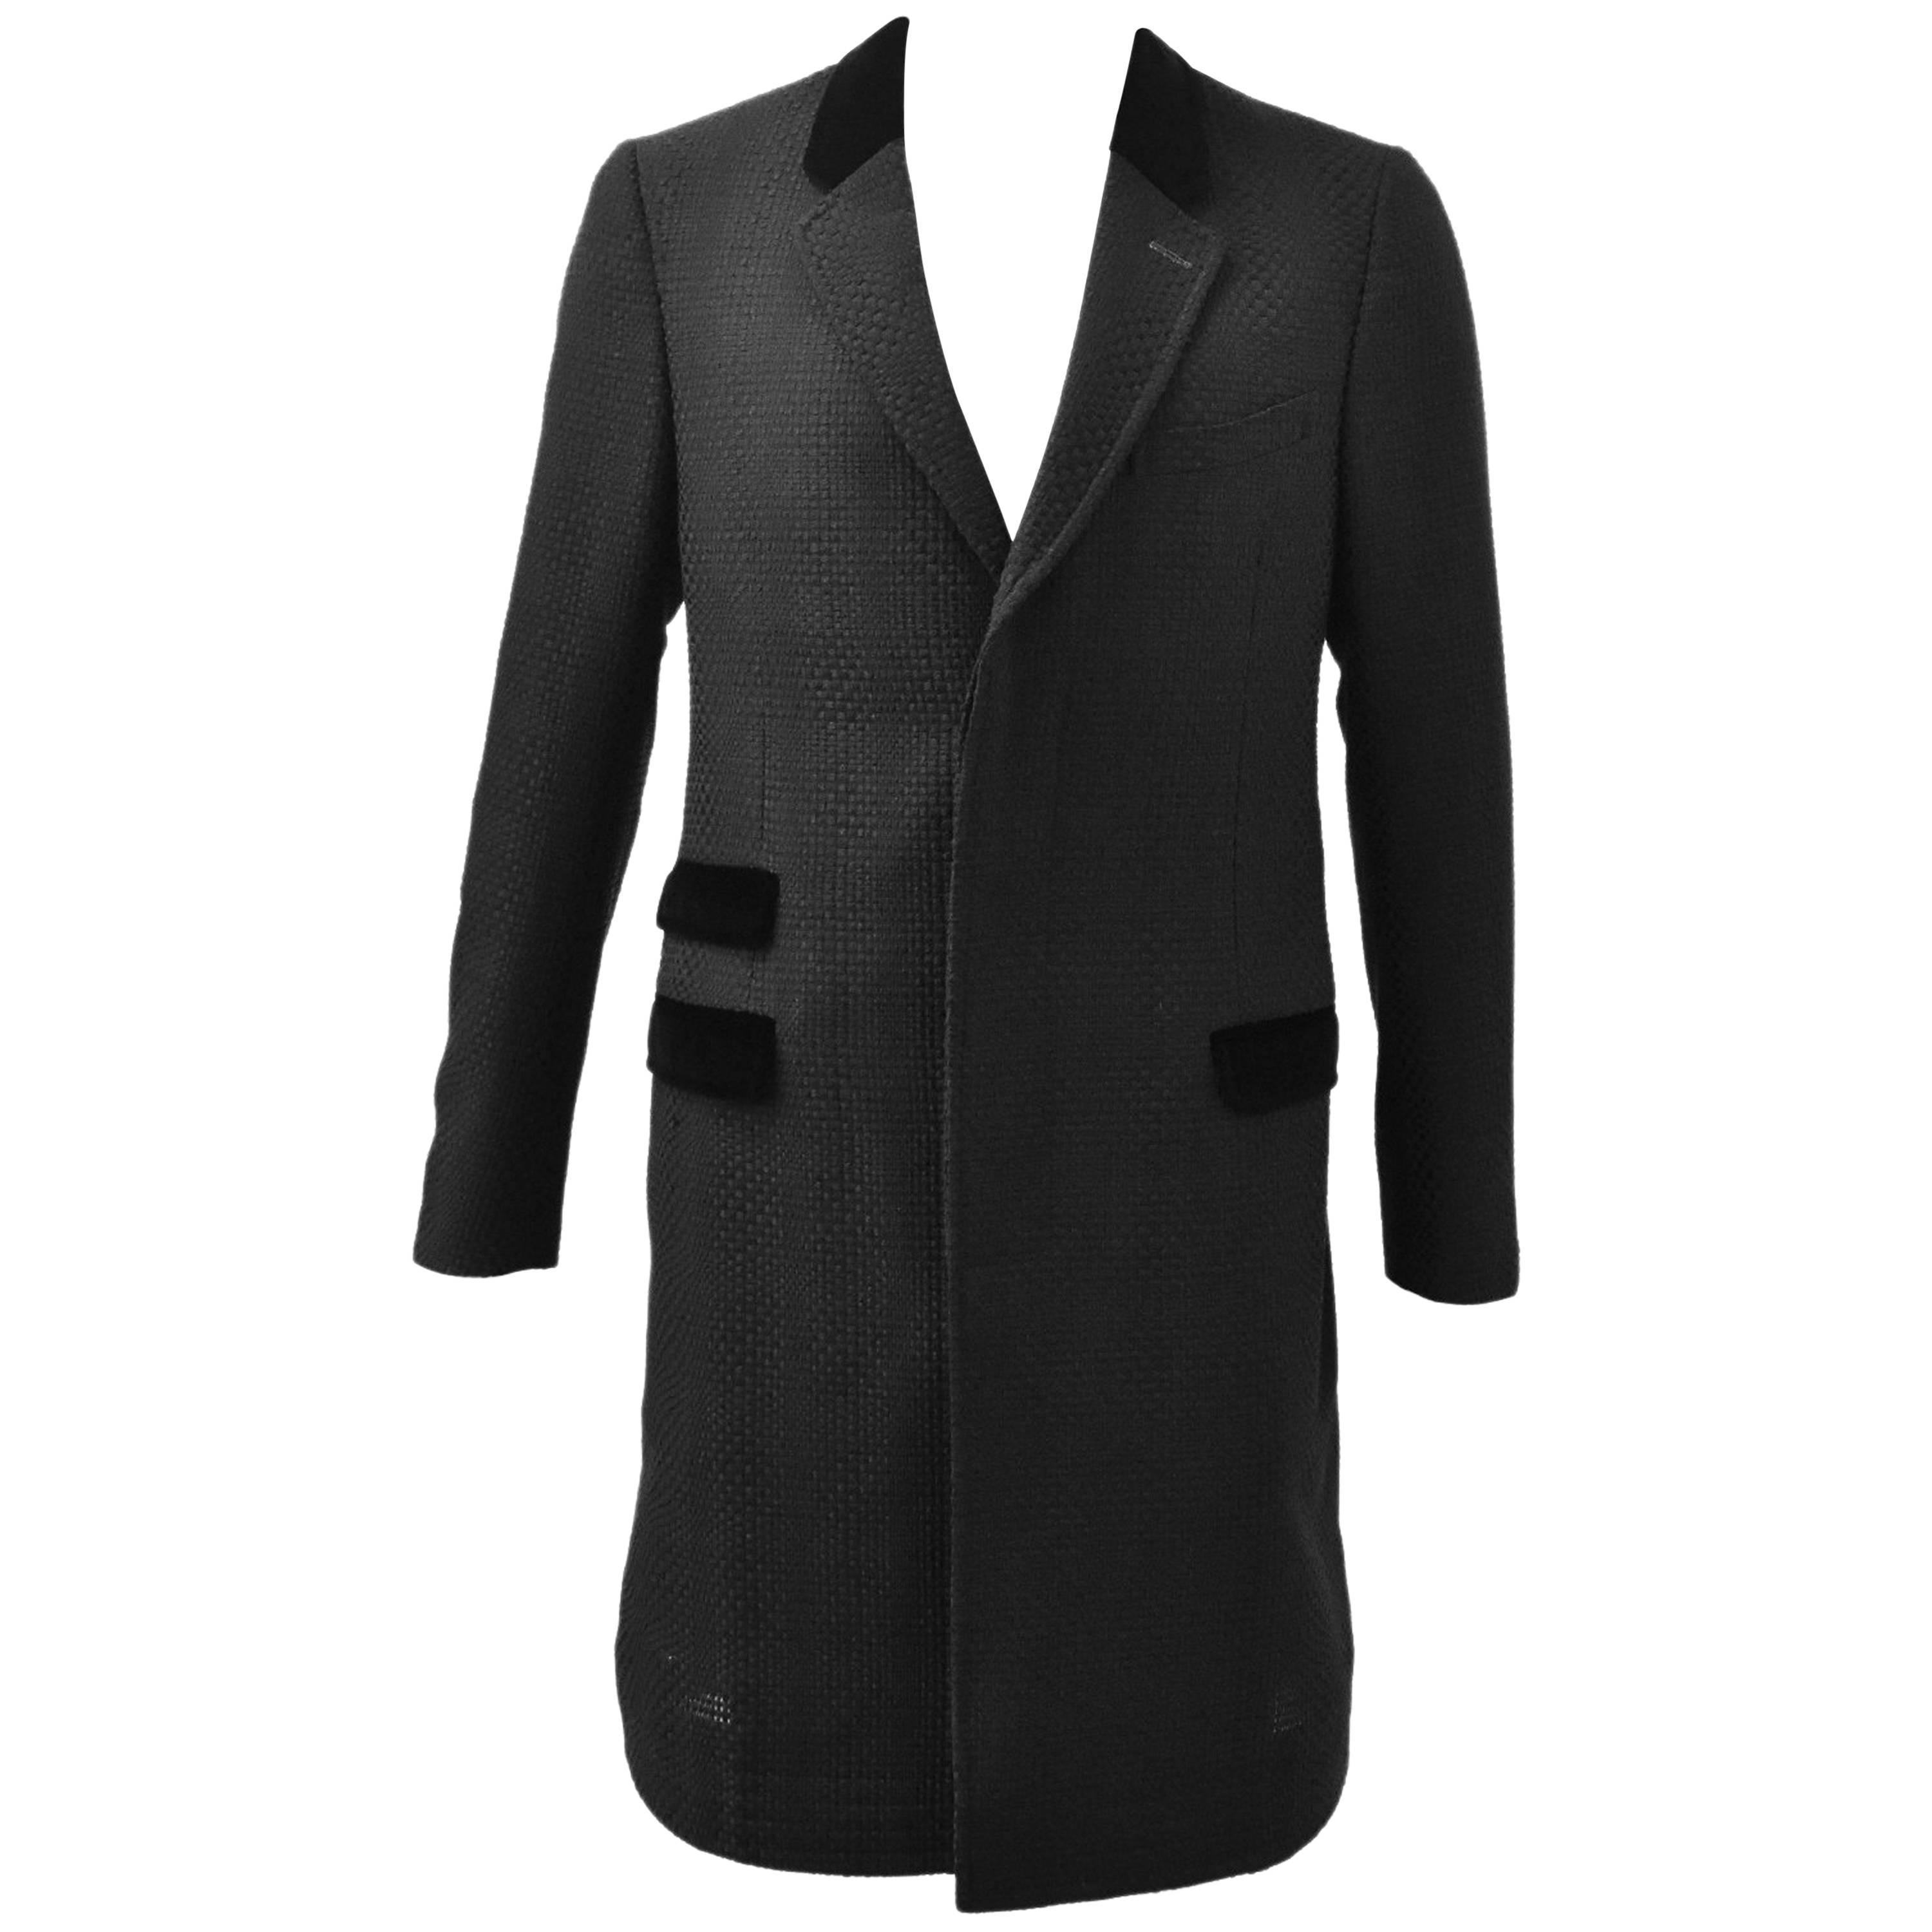 Alexander McQueen Black Woven Coat with Contrast Velvet Collar and Pockets S/S 1 For Sale